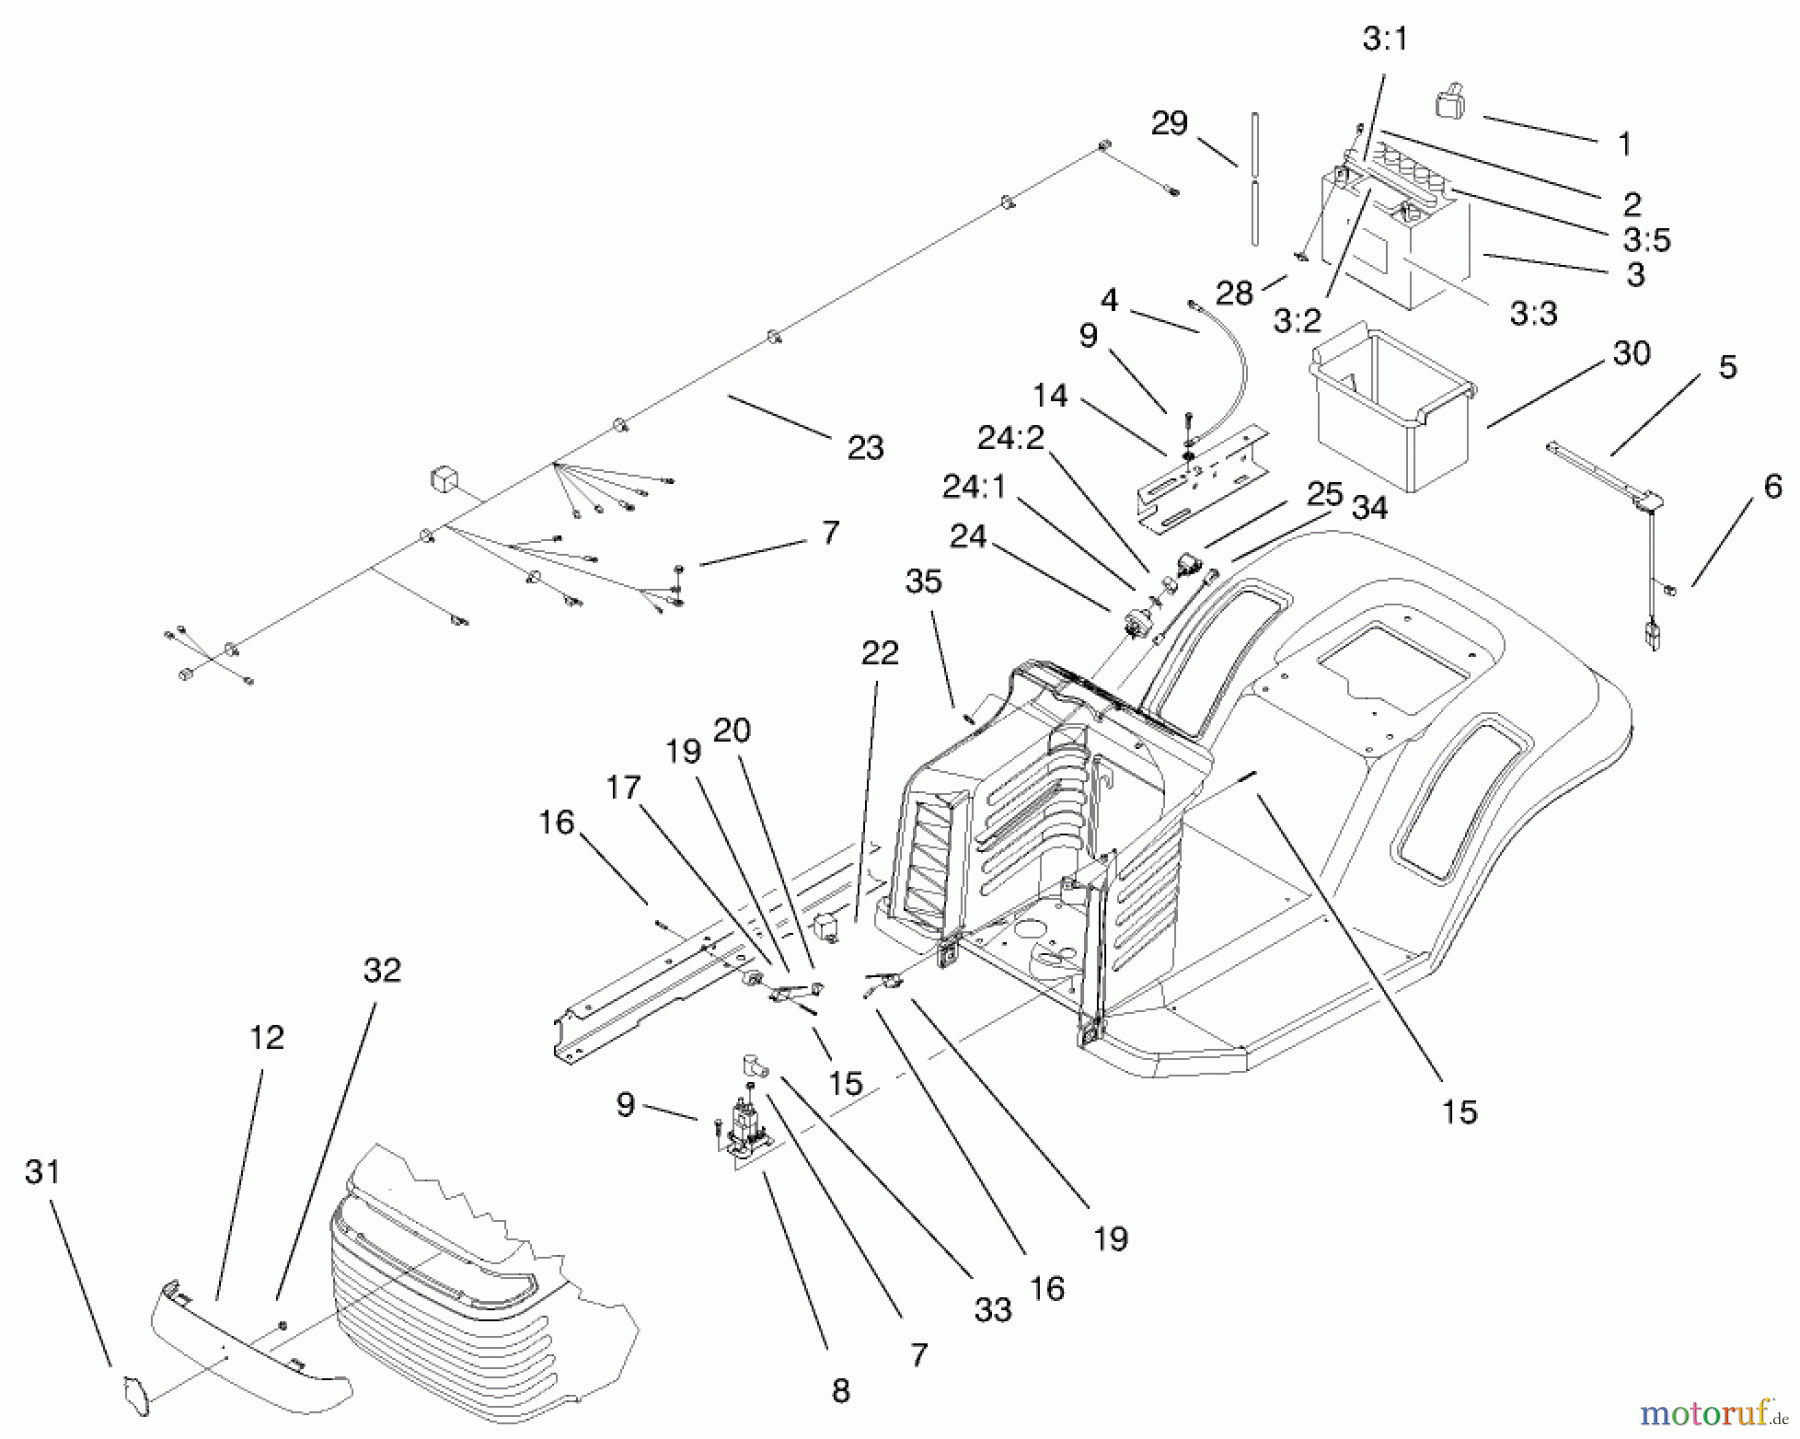  Toro Neu Mowers, Lawn & Garden Tractor Seite 1 71209 (13-32XLE) - Toro 13-32XLE Lawn Tractor, 1999 (9900001-9999999) ELECTRICAL COMPONENTS ASSEMBLY